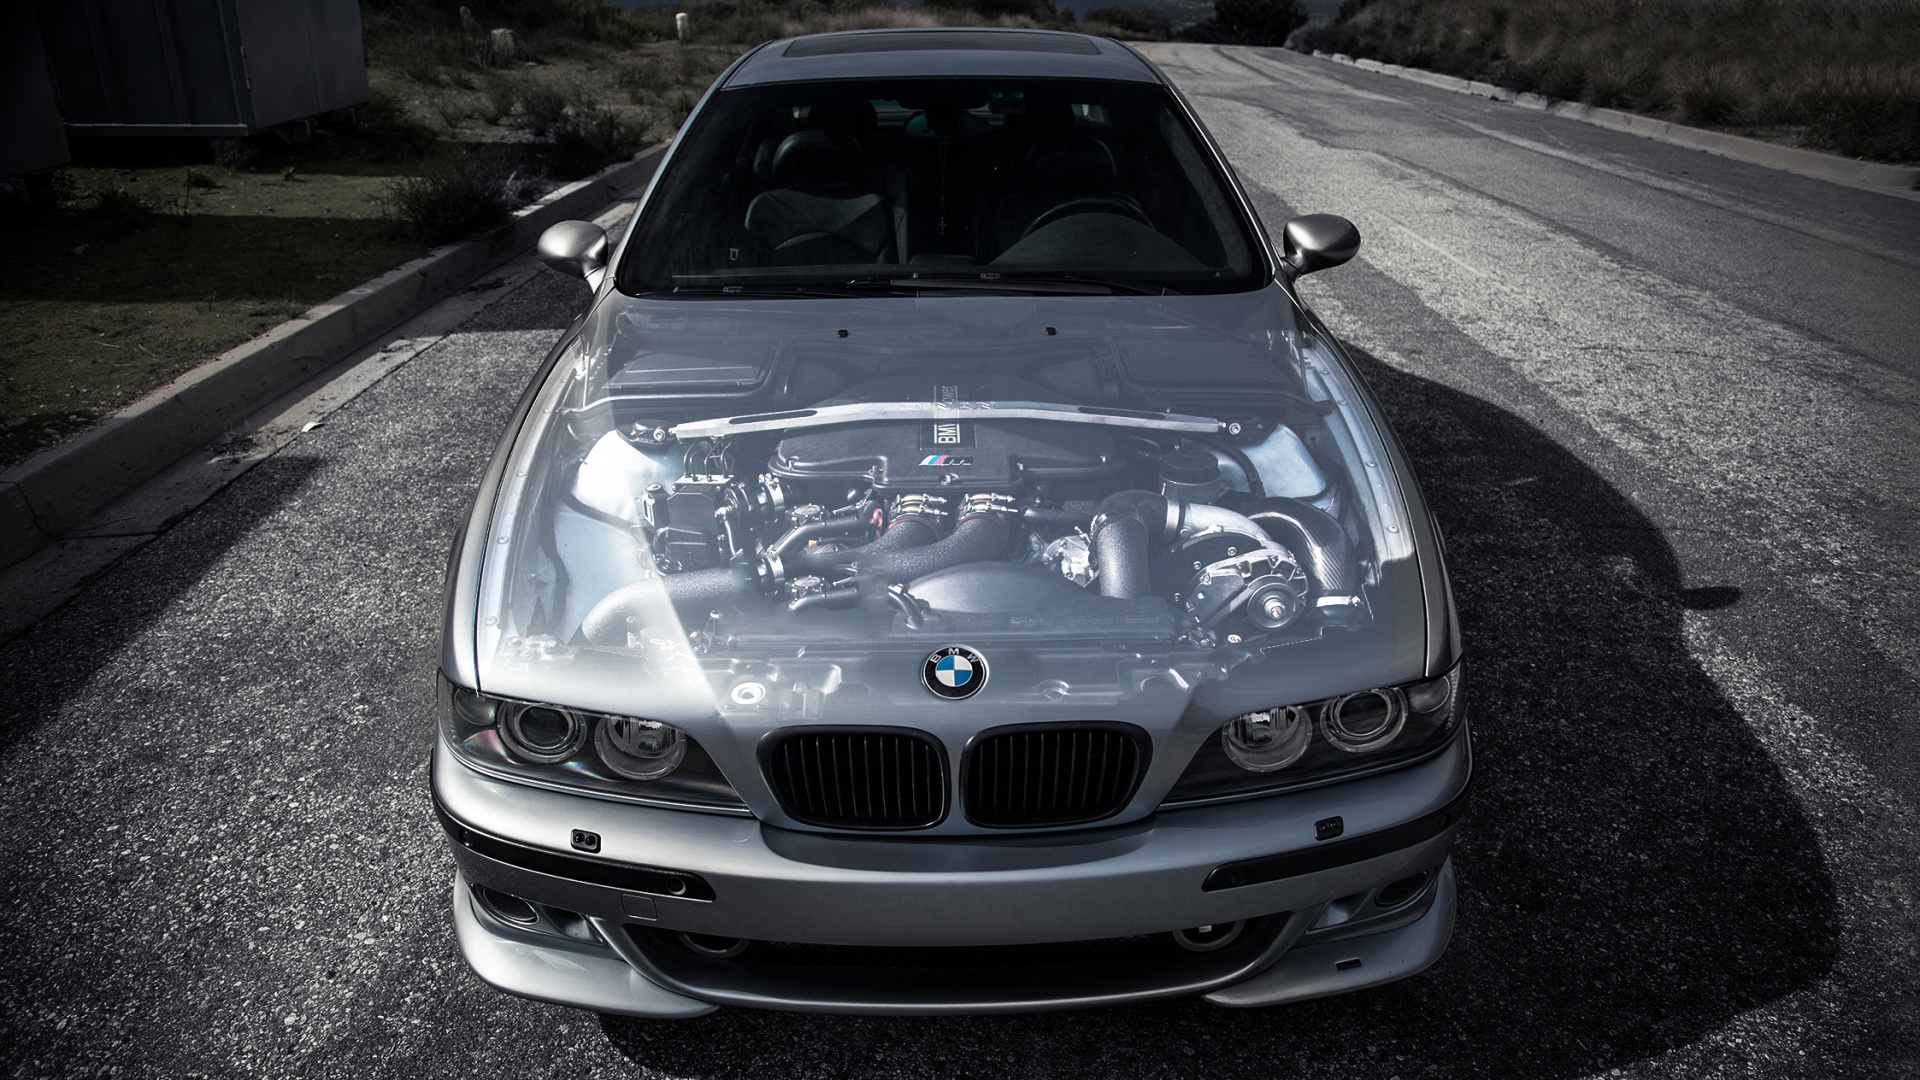 BMW e39 Wallpapers Images Photos Pictures Backgrounds